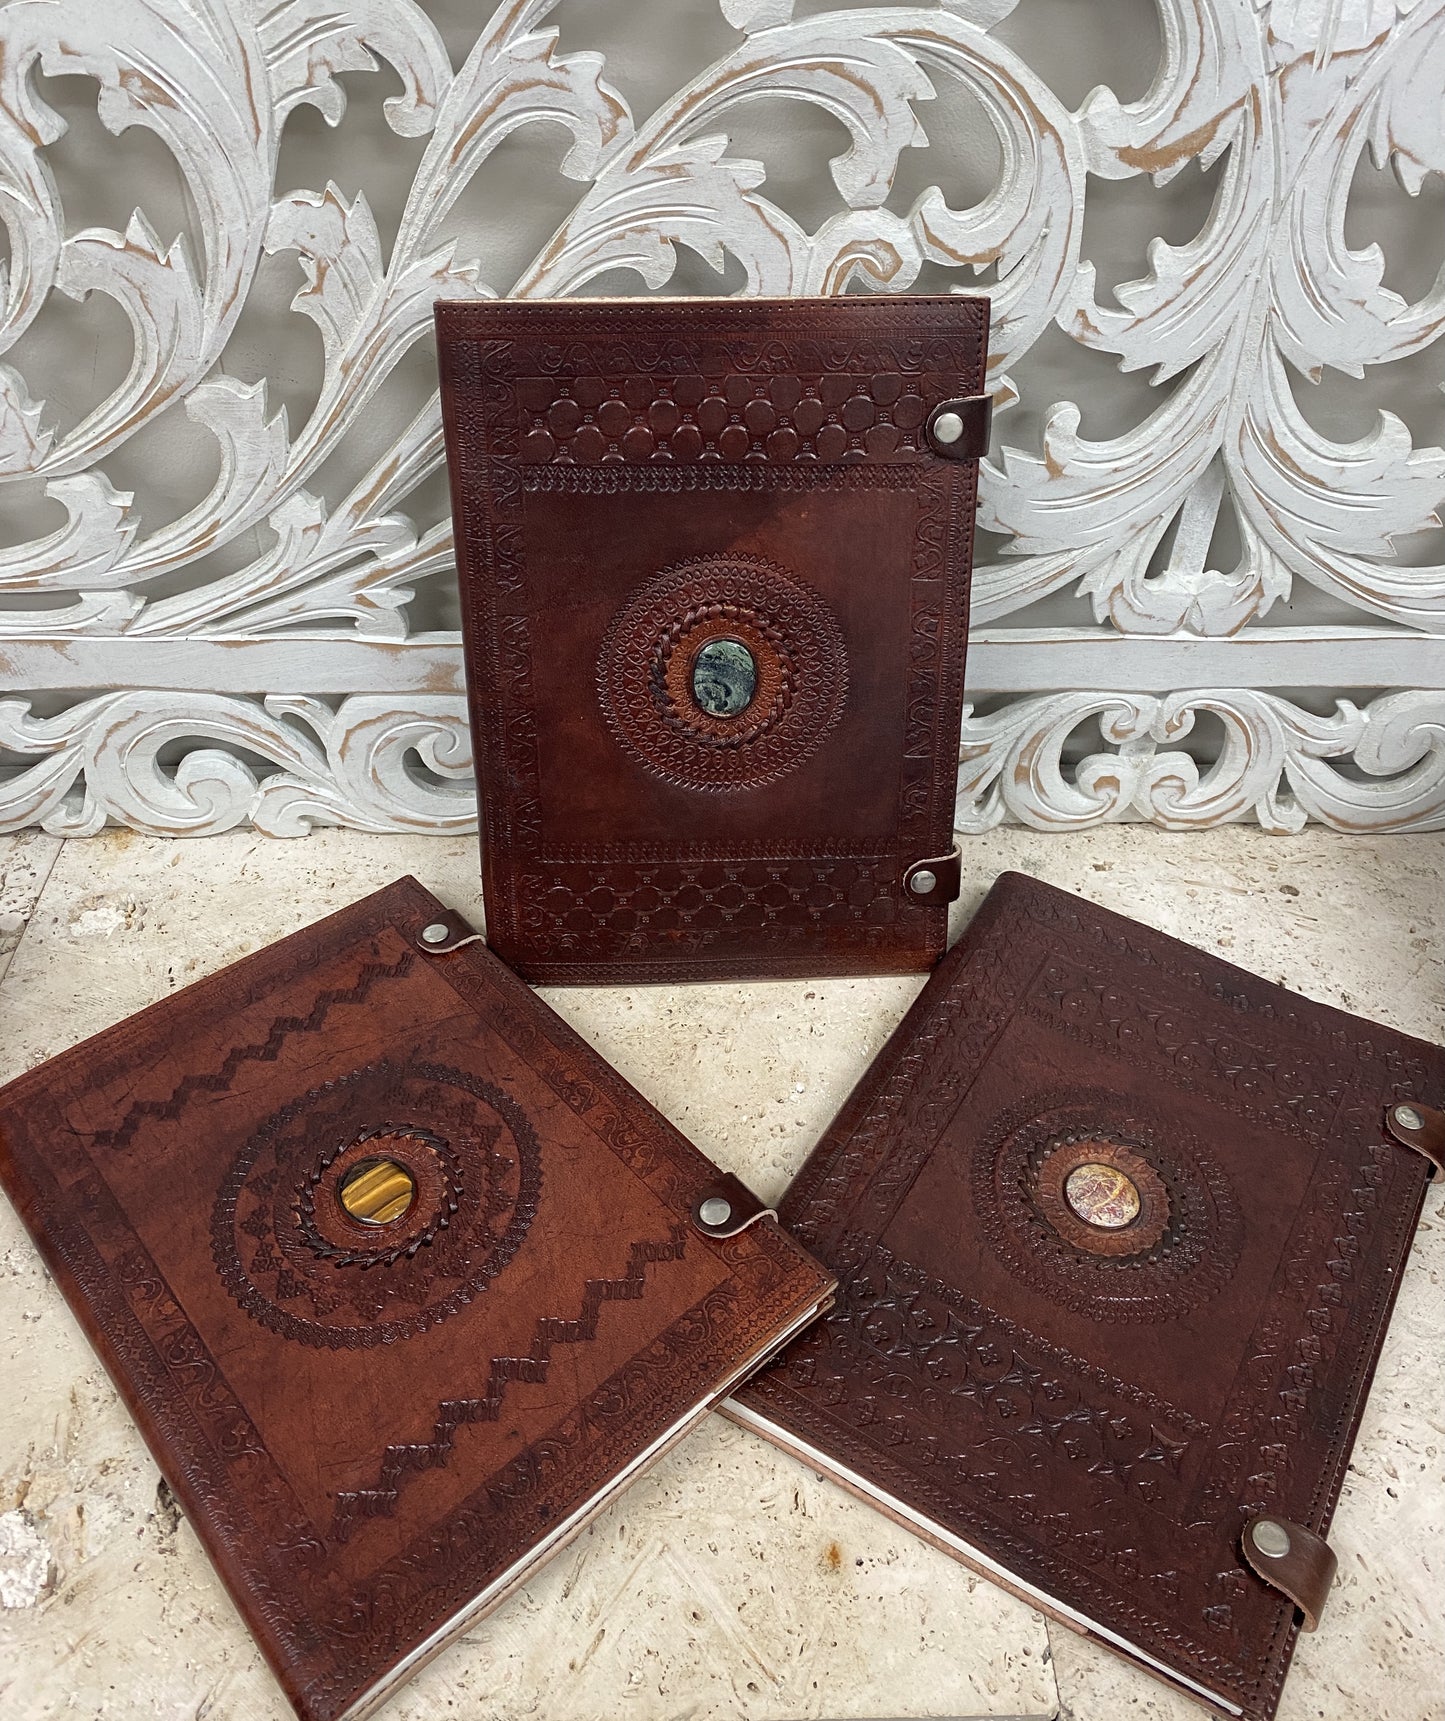 Refillable Hand Embossed Camel leather Journal or Sketch book with Gemstones & Button Clasp - 12.5" x 9" x 1/2"